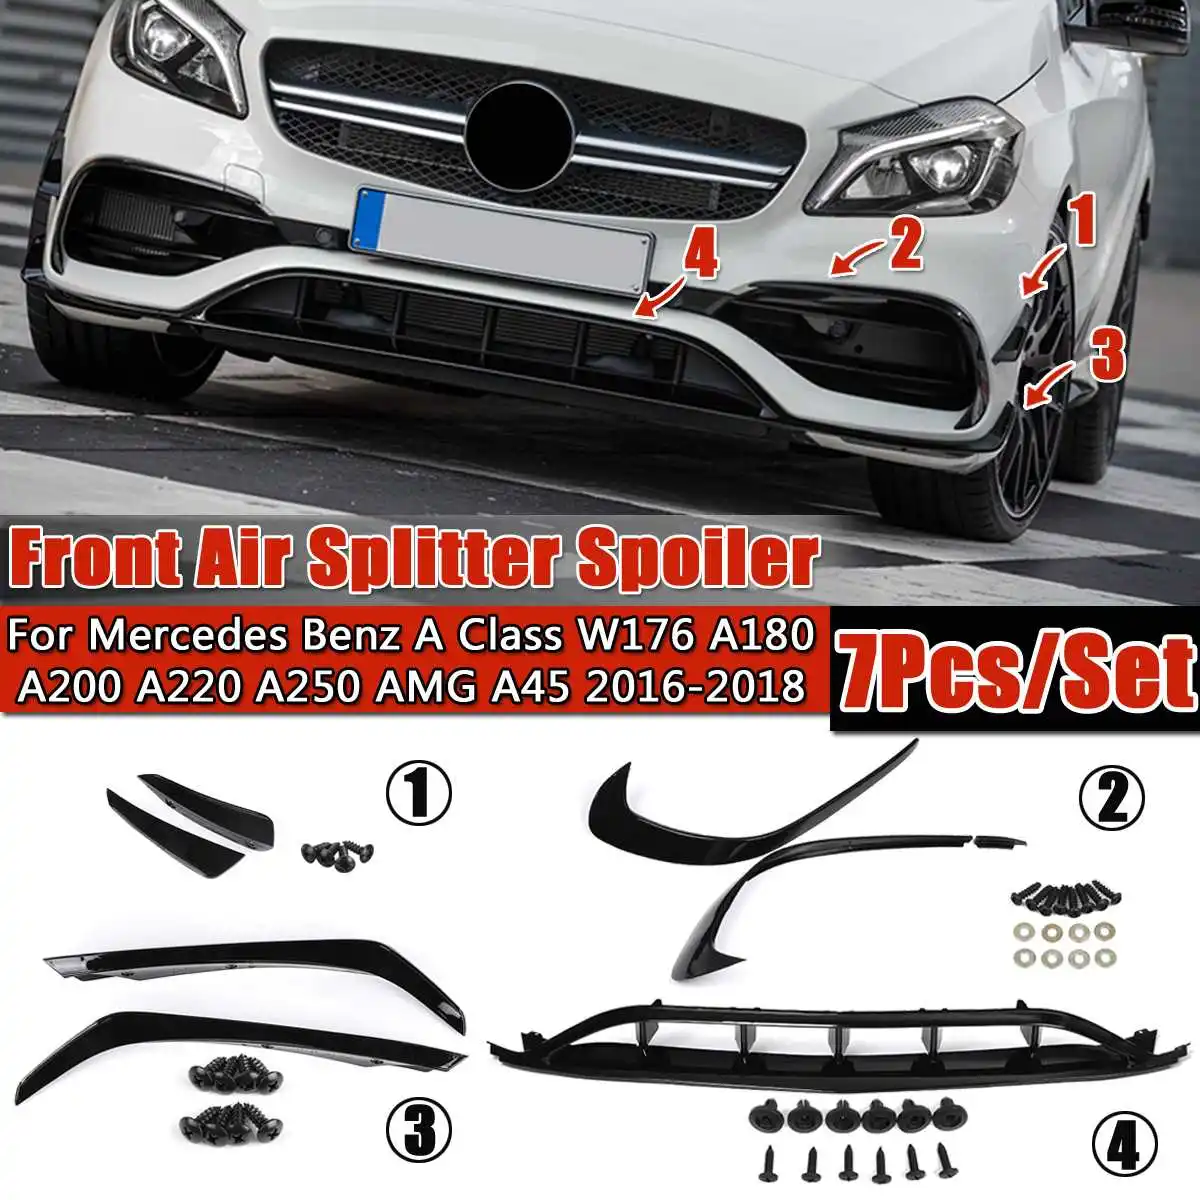 

W176 7PCS Front Bumper Side Canards Splitter Spoiler For Mercedes for Benz A-Class A180 A200 A220 A250 for AMG A45 2016-18